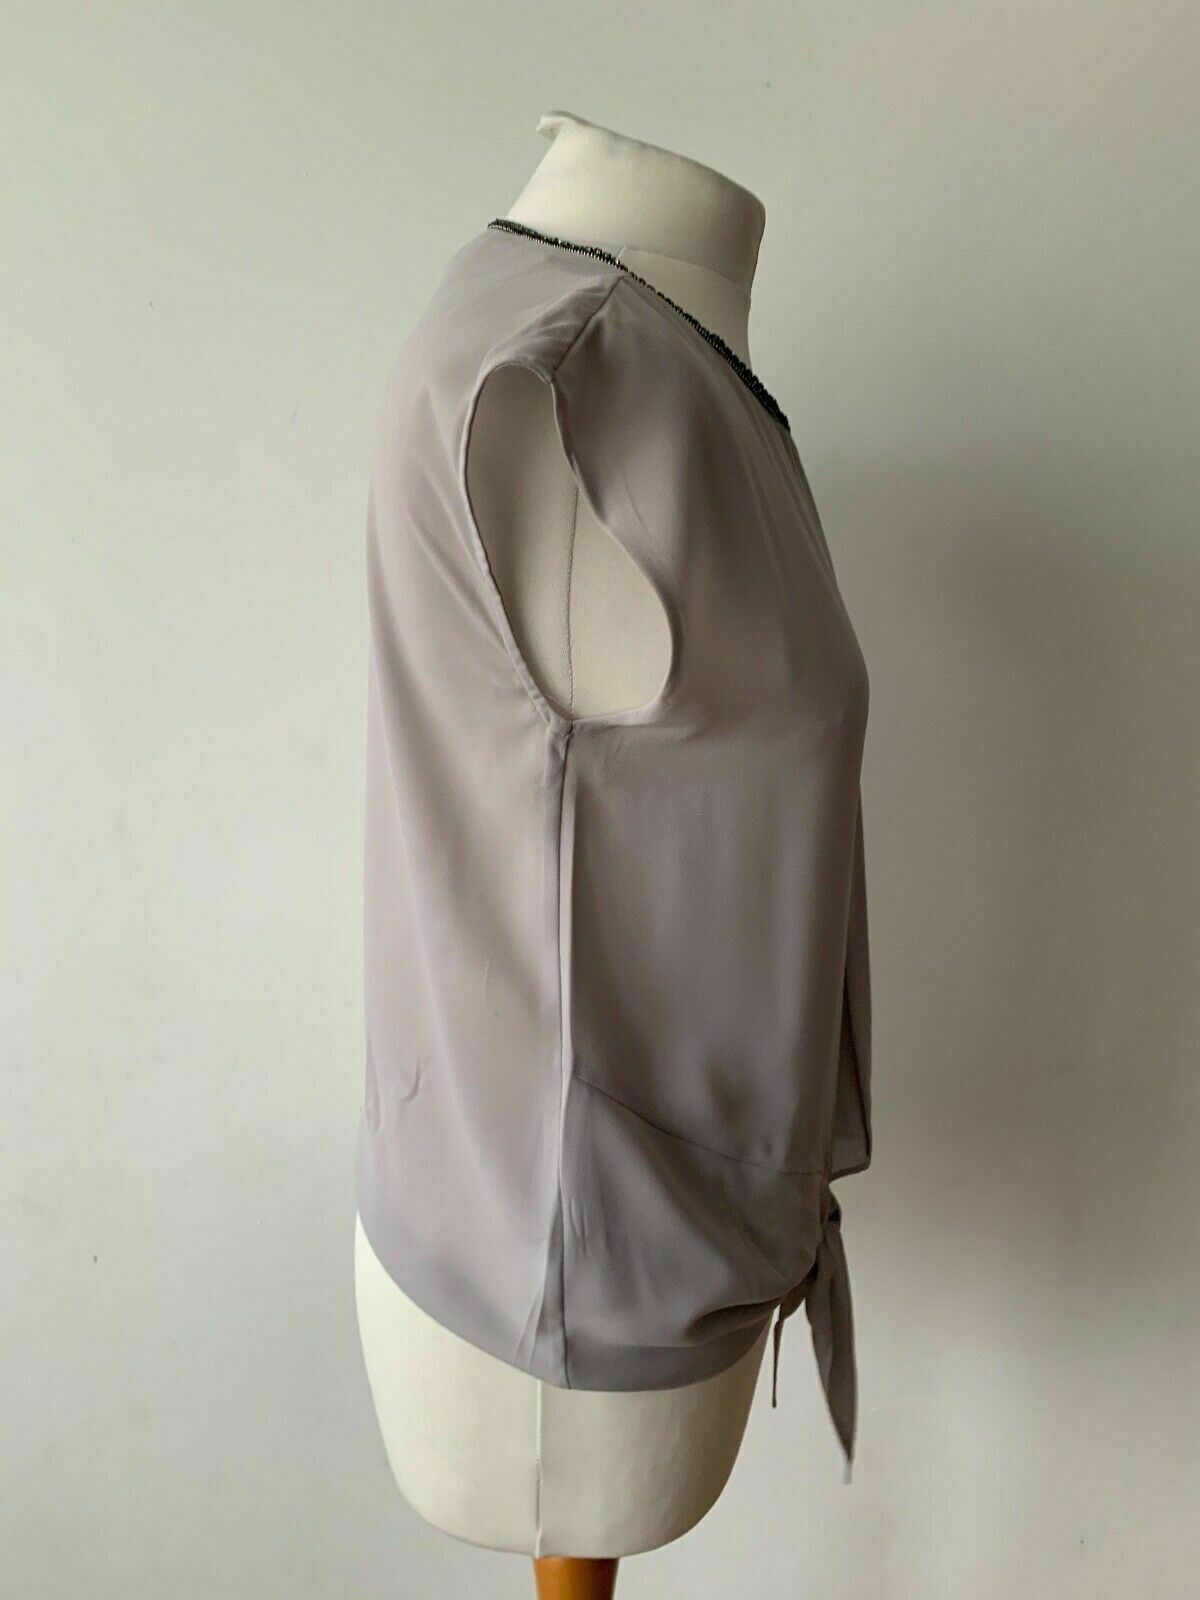 OASIS Grey Sleeveless Blouse Bejewelled Neckline Tie Front Size 8